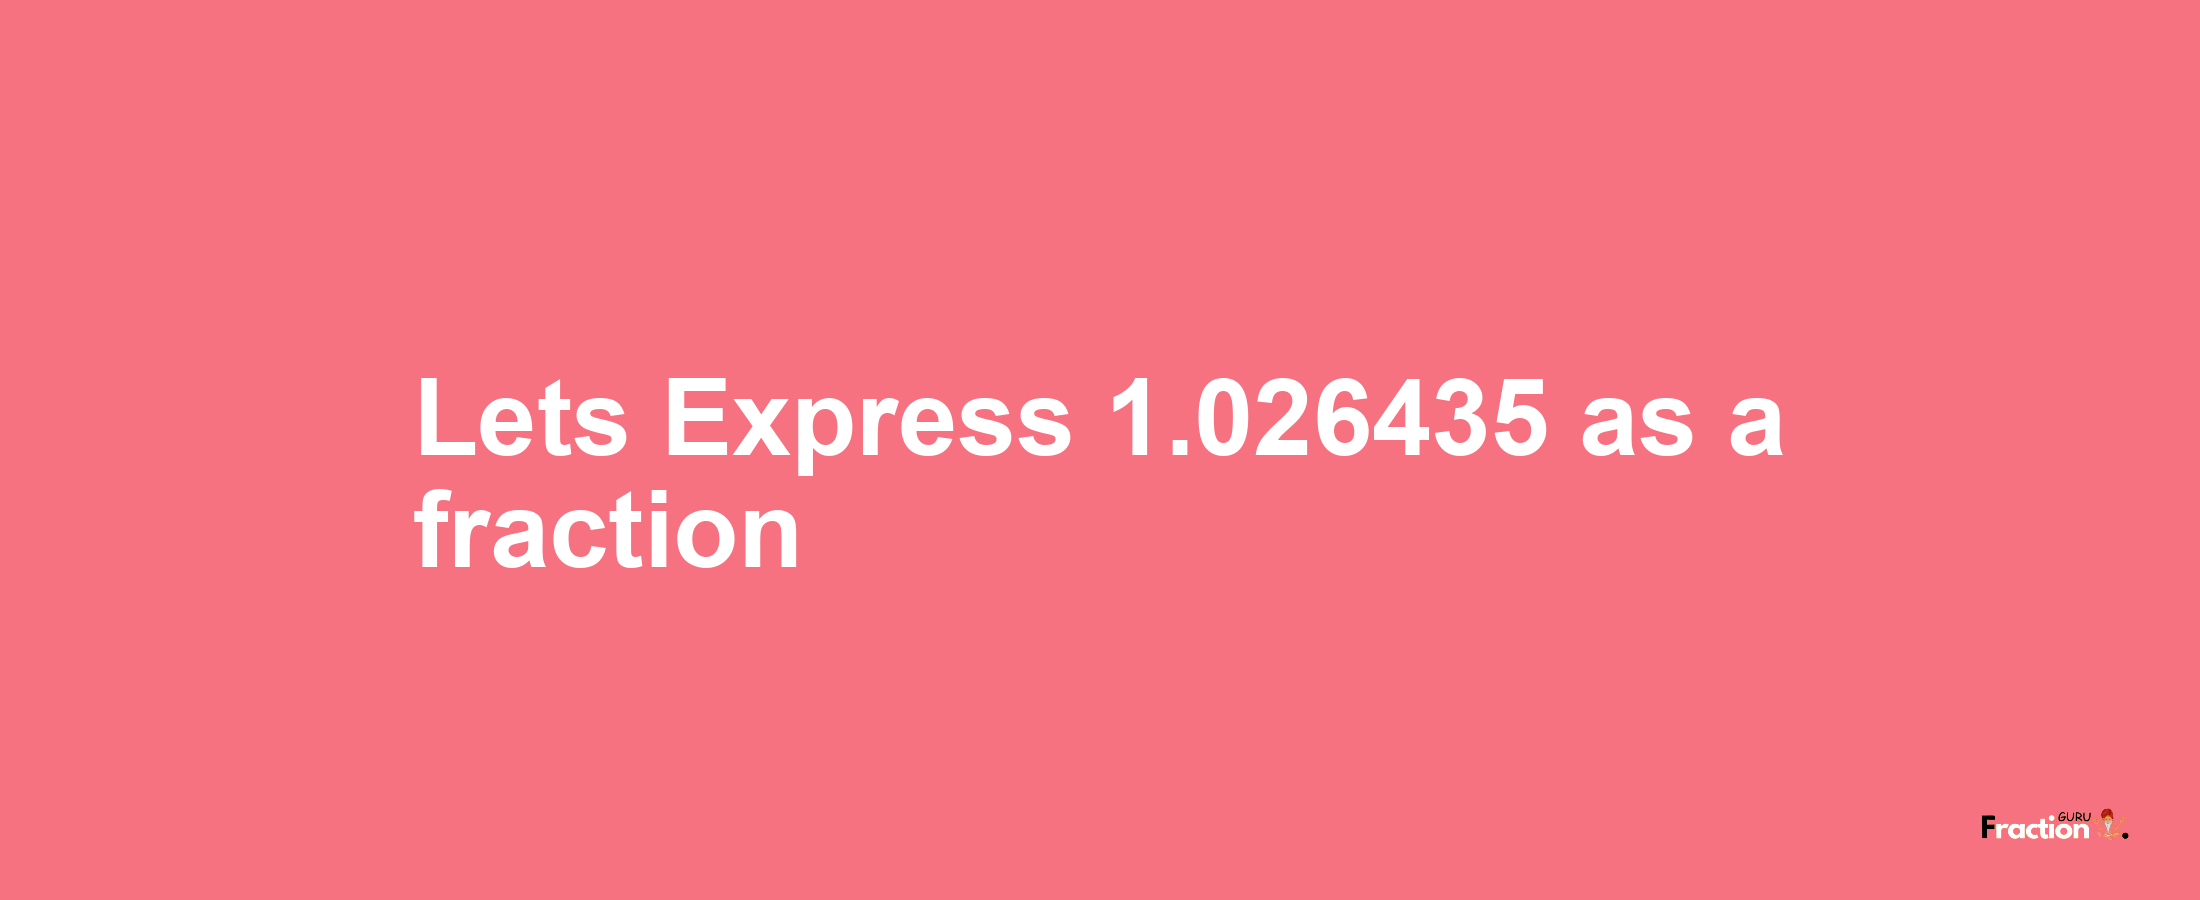 Lets Express 1.026435 as afraction